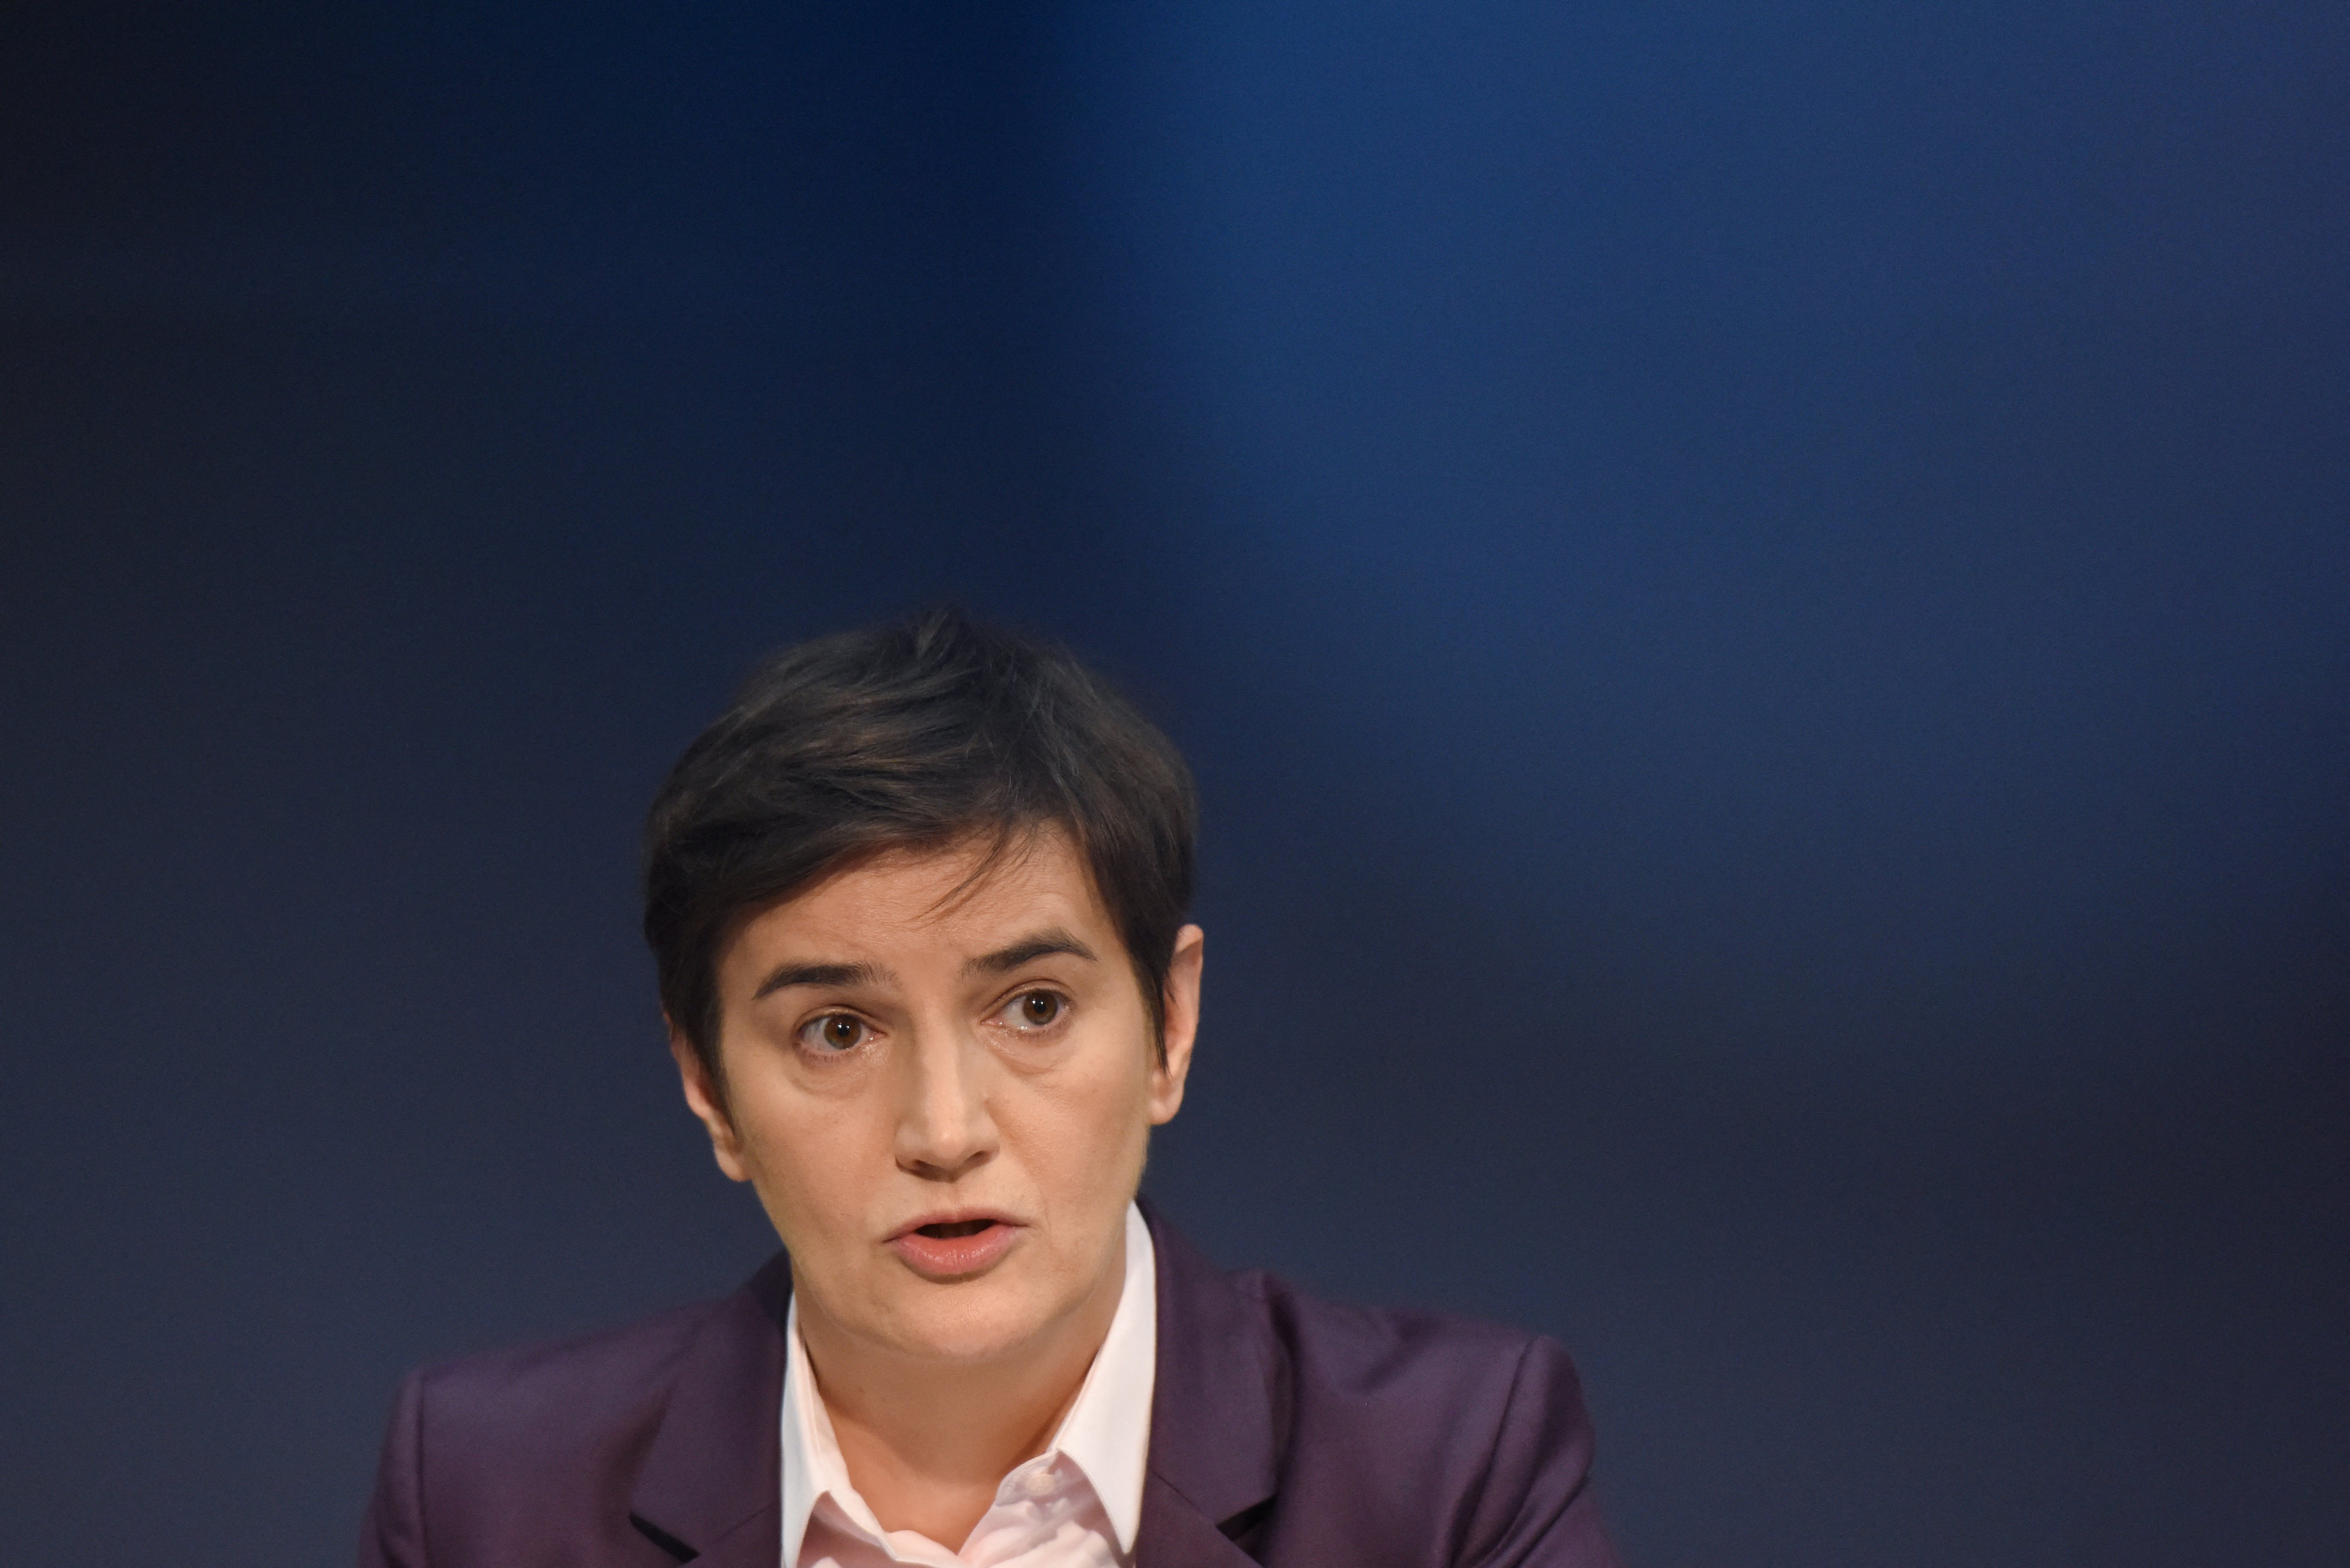 Serbian Prime Minister Ana Brnabic speaks during a news conference, in Belgrade